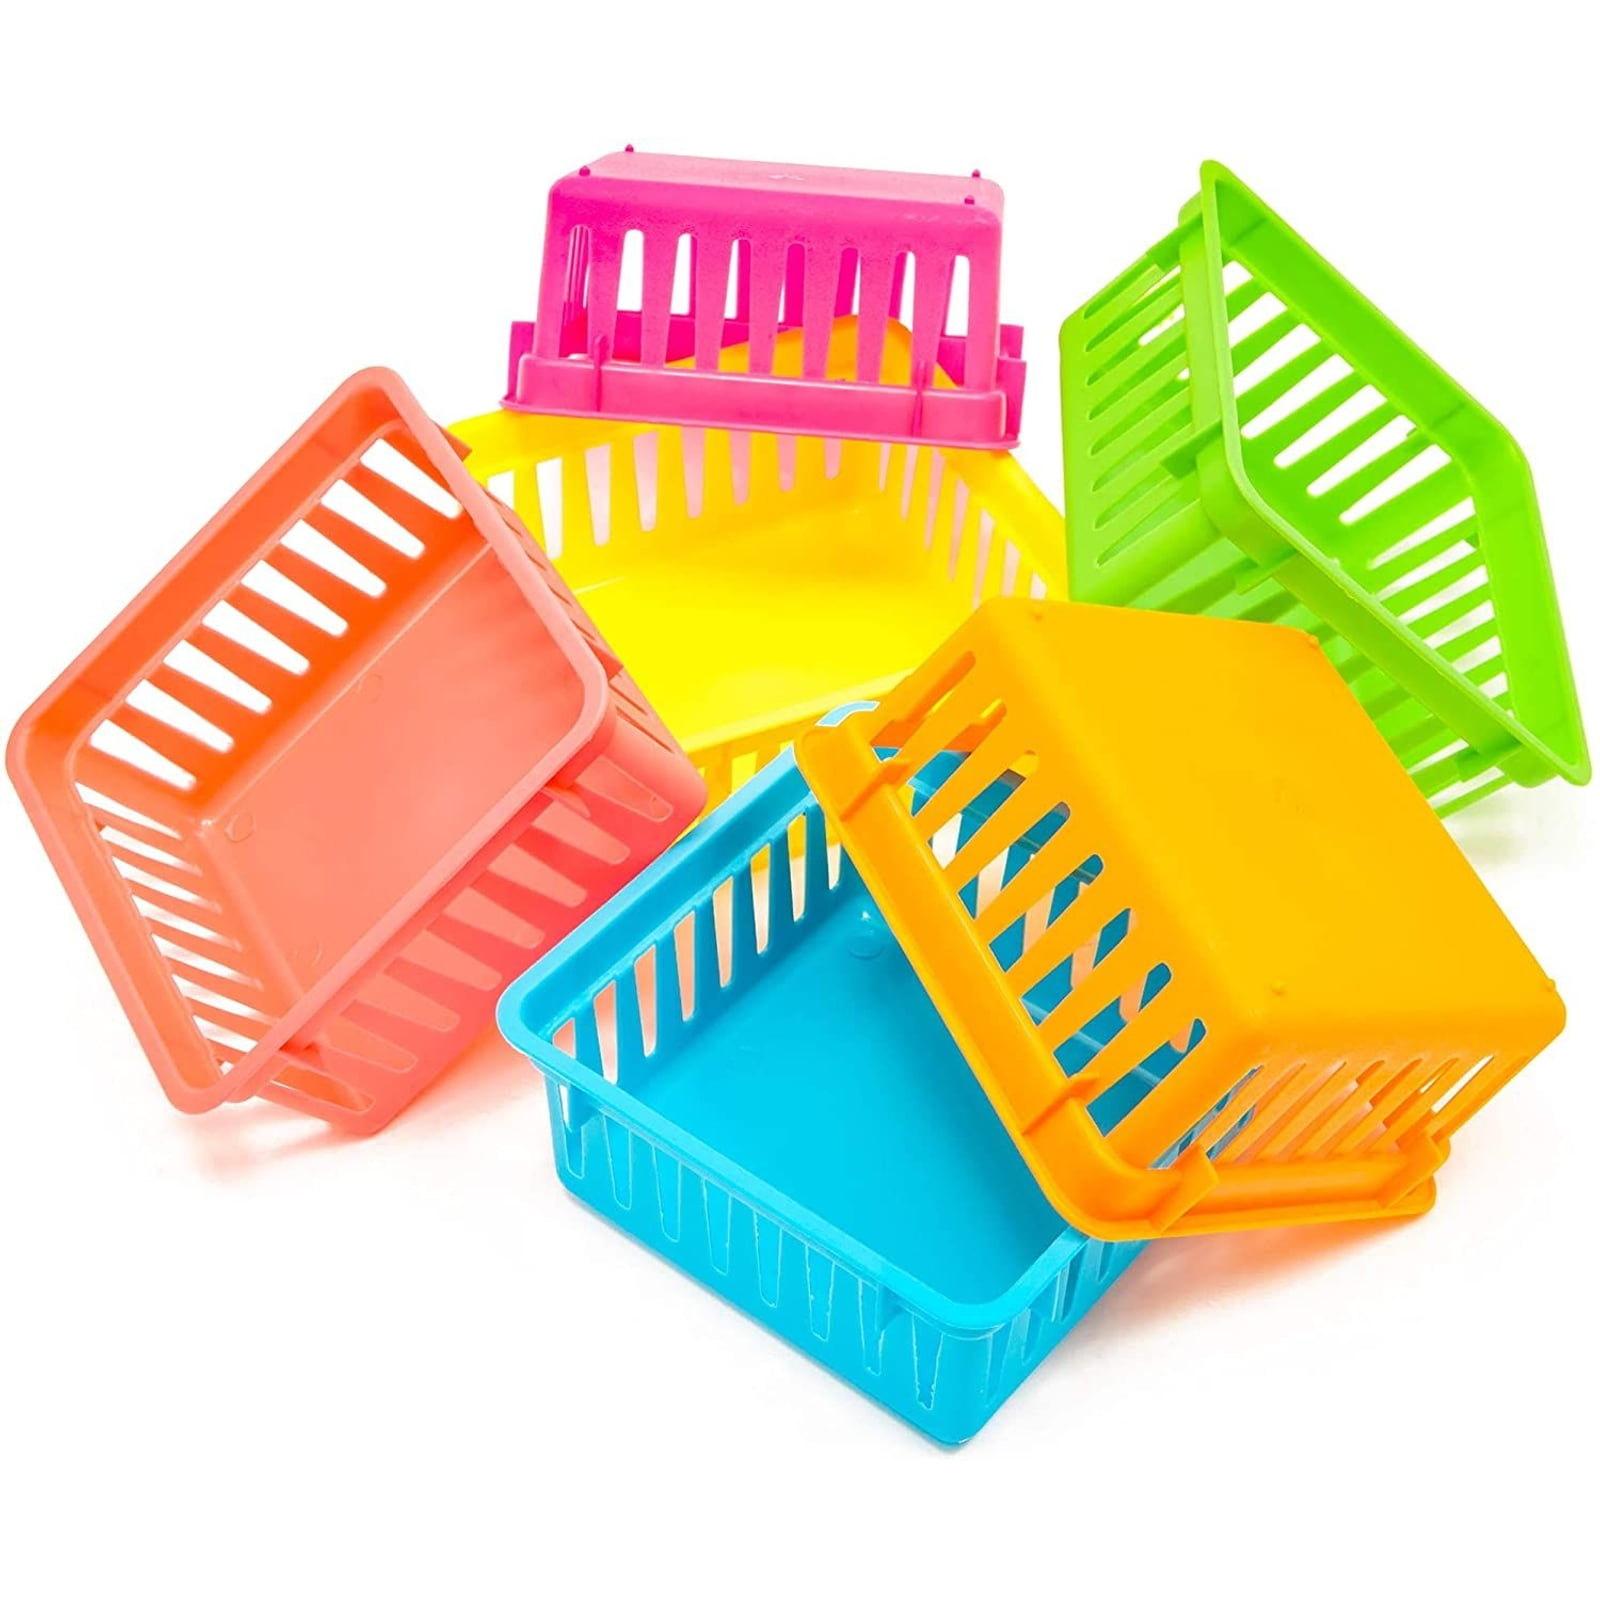 10 Pack Mini Storage Baskets Bins, Plastic Organizer Basket, Colorful Shelf  and Desk Make-up Storage Crate Organizing Containers, Ideal for Home